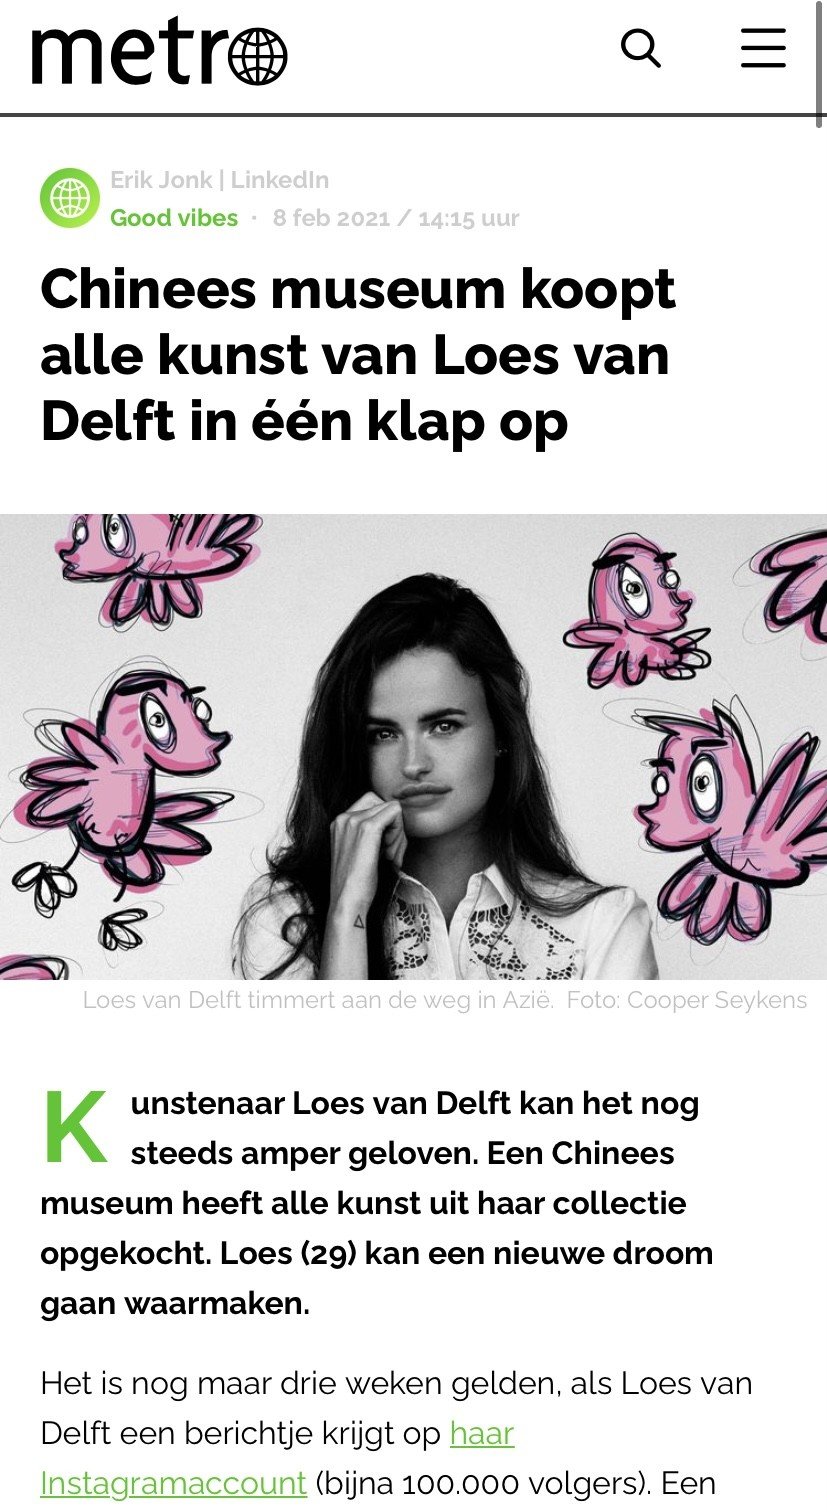 The Dutch media Metronieuws.nl reported that Lose van Delft's works have attracted much attention in China.